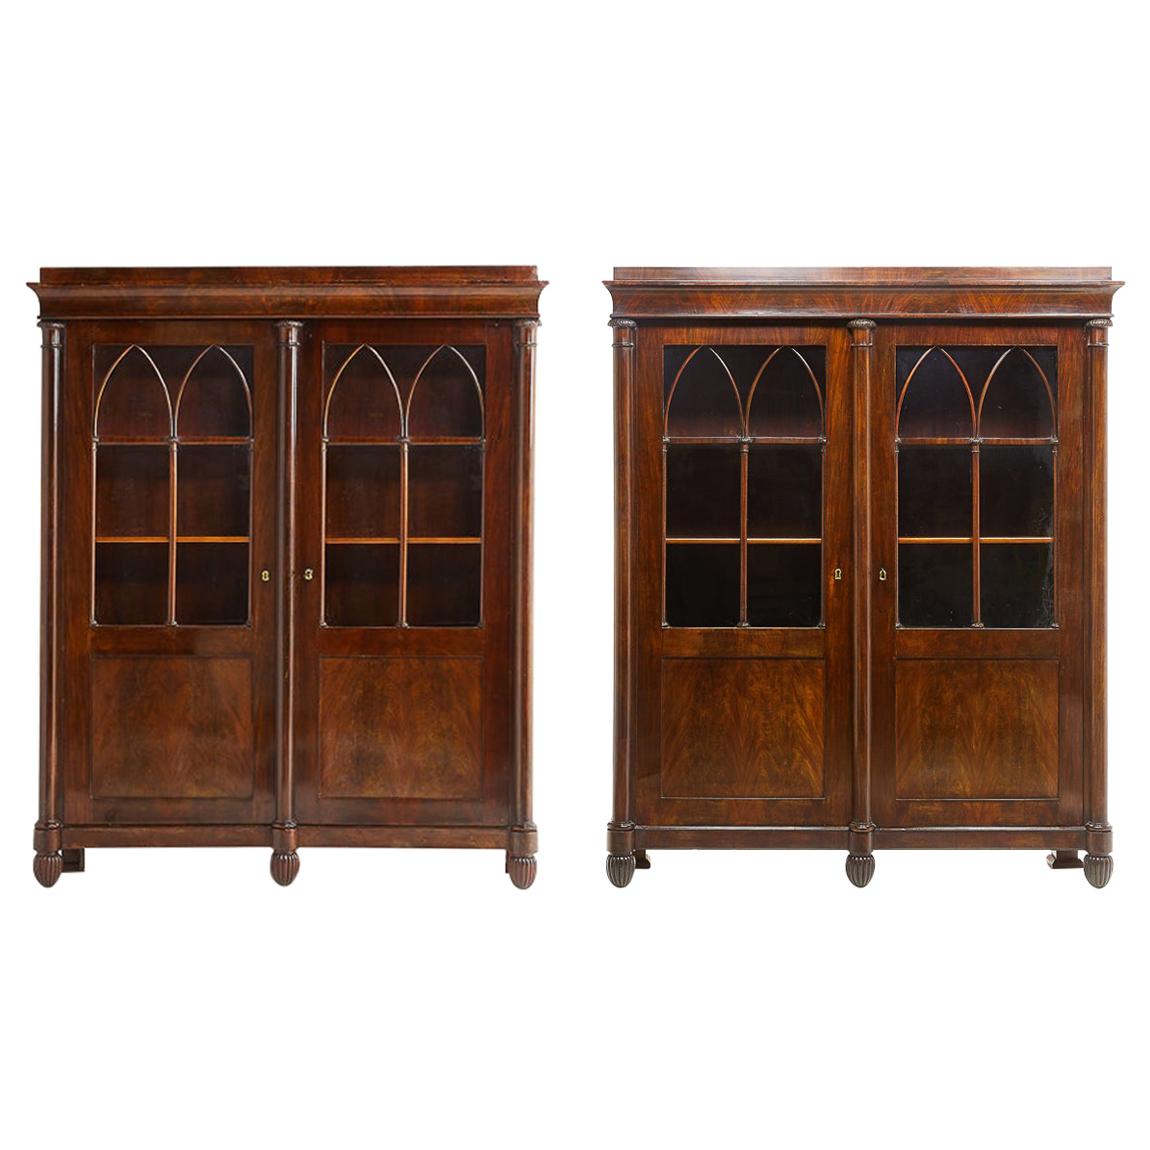 Early 19th Century Pair of French Empire Period Bookcases